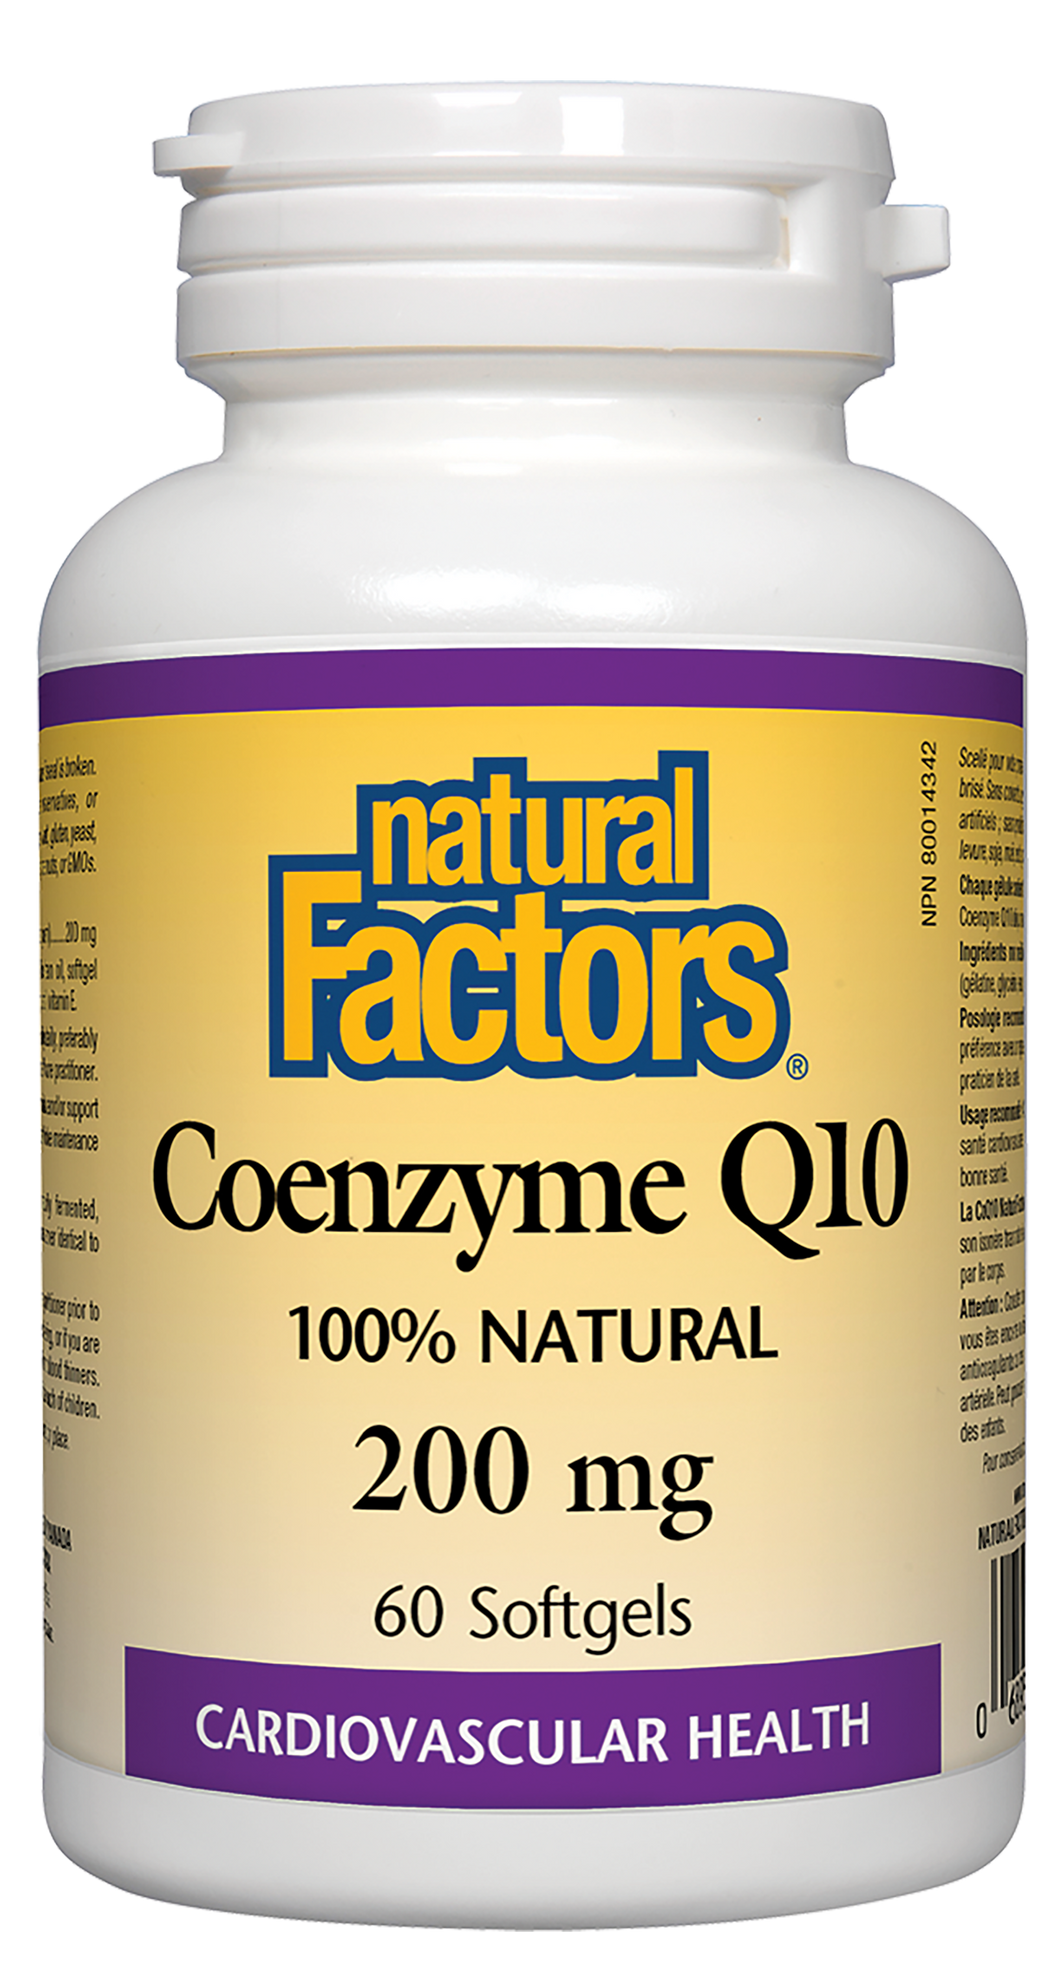 Coenzyme Q10 is a vitamin-like essential nutrient that helps increase levels of cellular energy production and is required by every cell in our body. Known to support cardiovascular health and cellular vigour. Natural Factors Coenzyme Q10 200 mg is 100% natural.